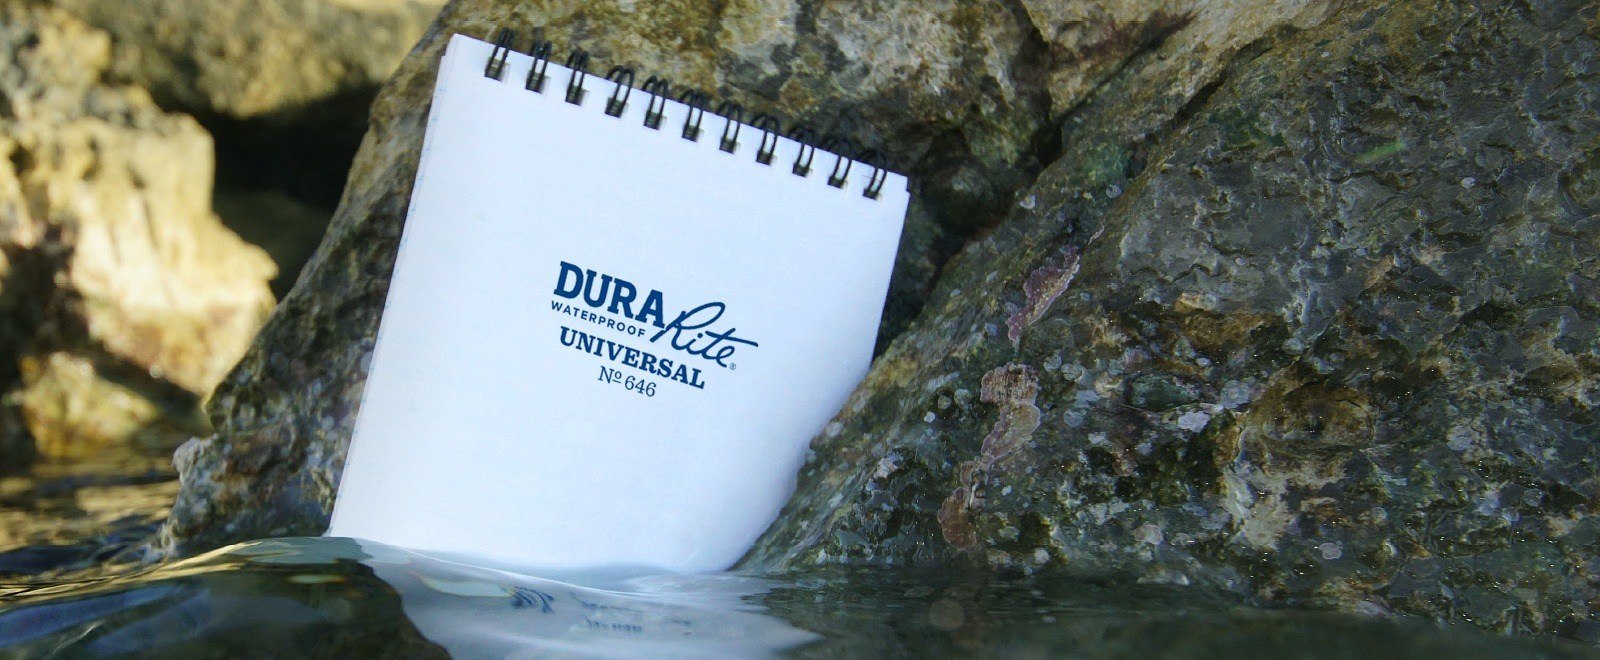 DuraRite Spiral notebook siting in water against a rock.